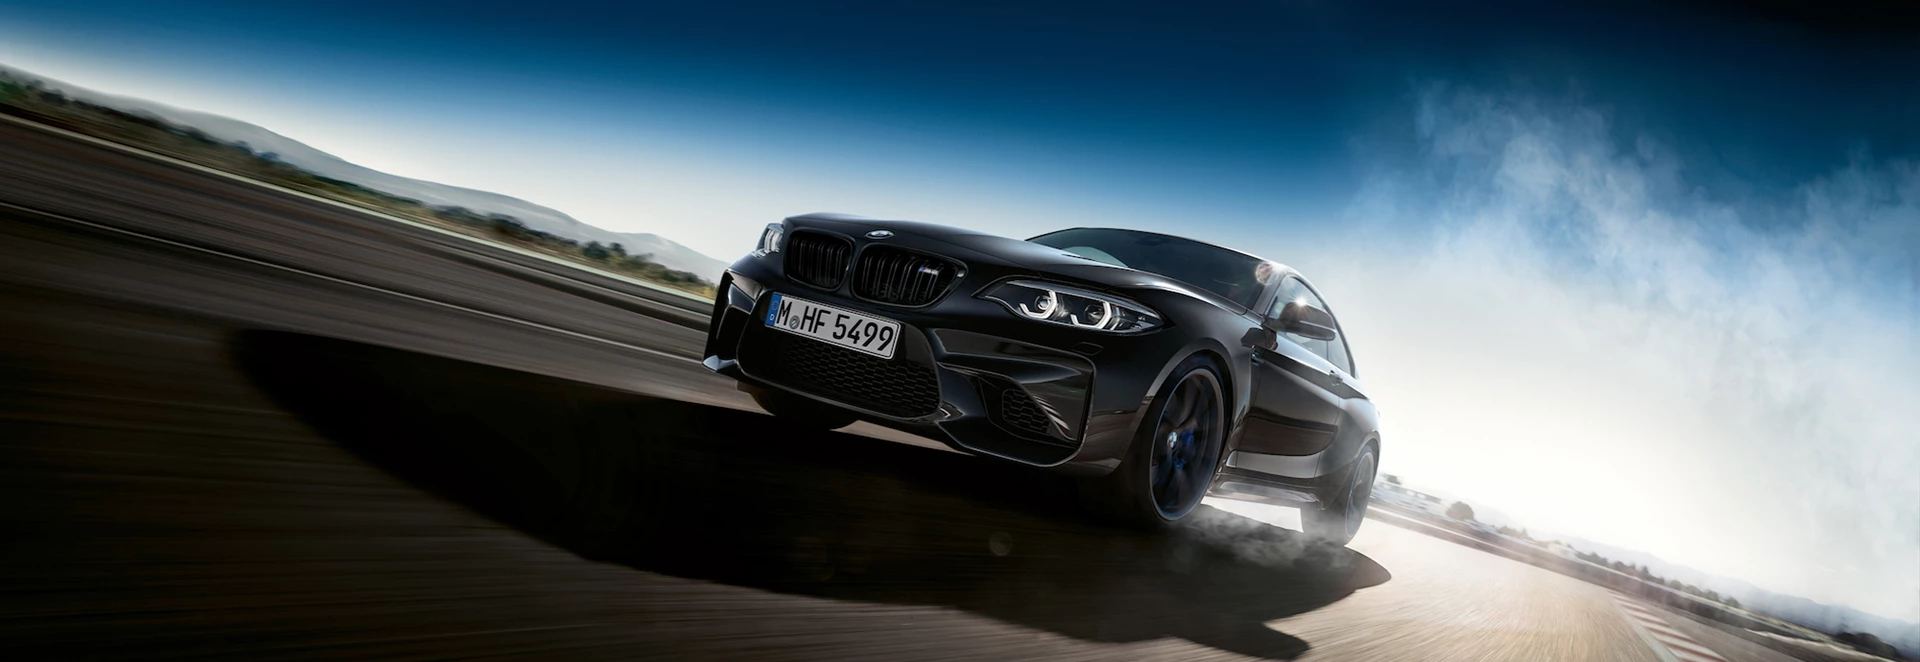 BMW unveils Black Shadow edition for M2 Coupe